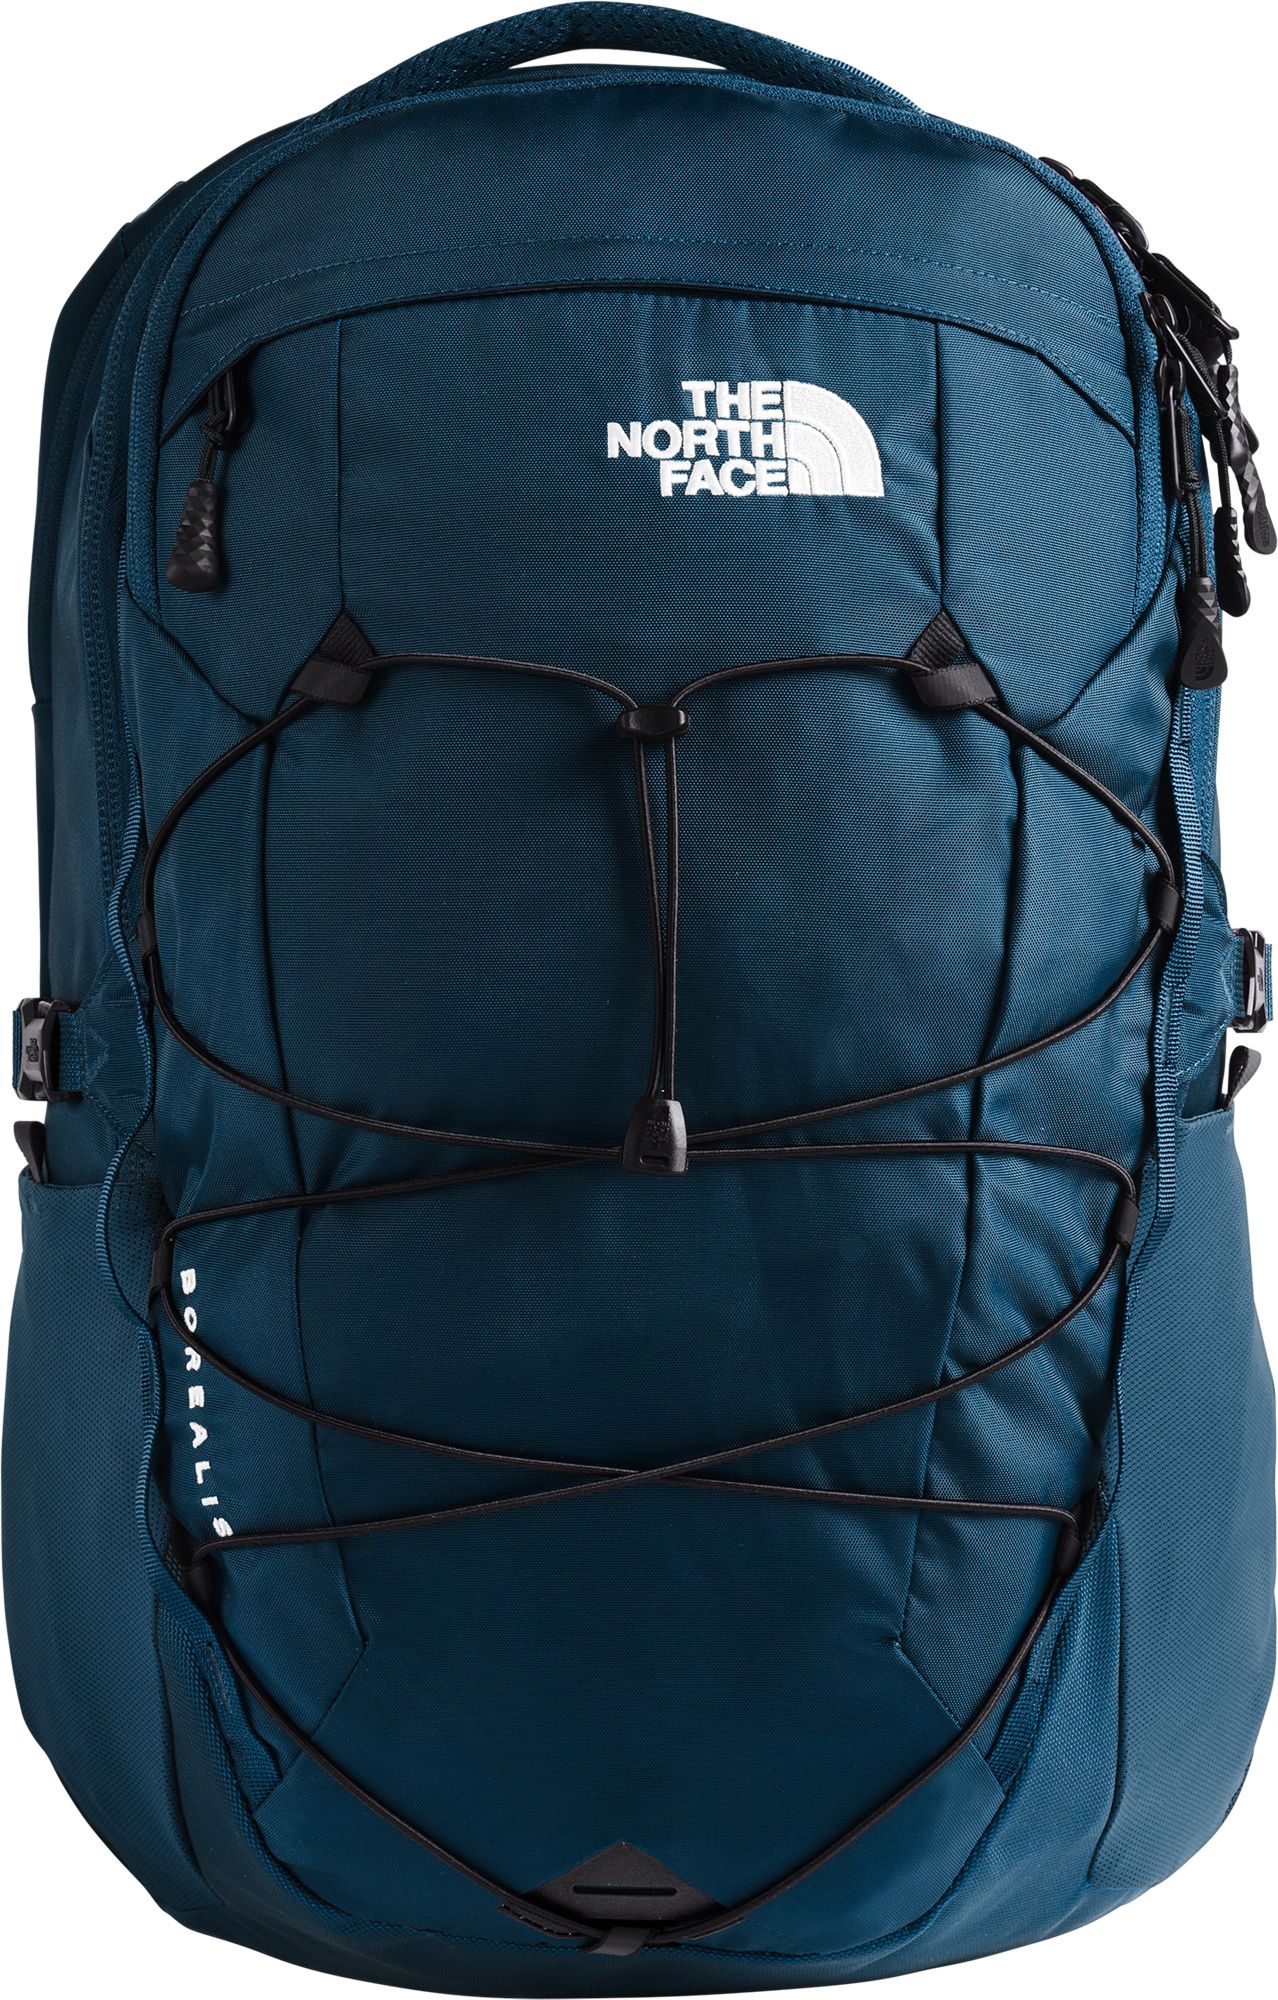 The North Face Borealis 18 Backpack 